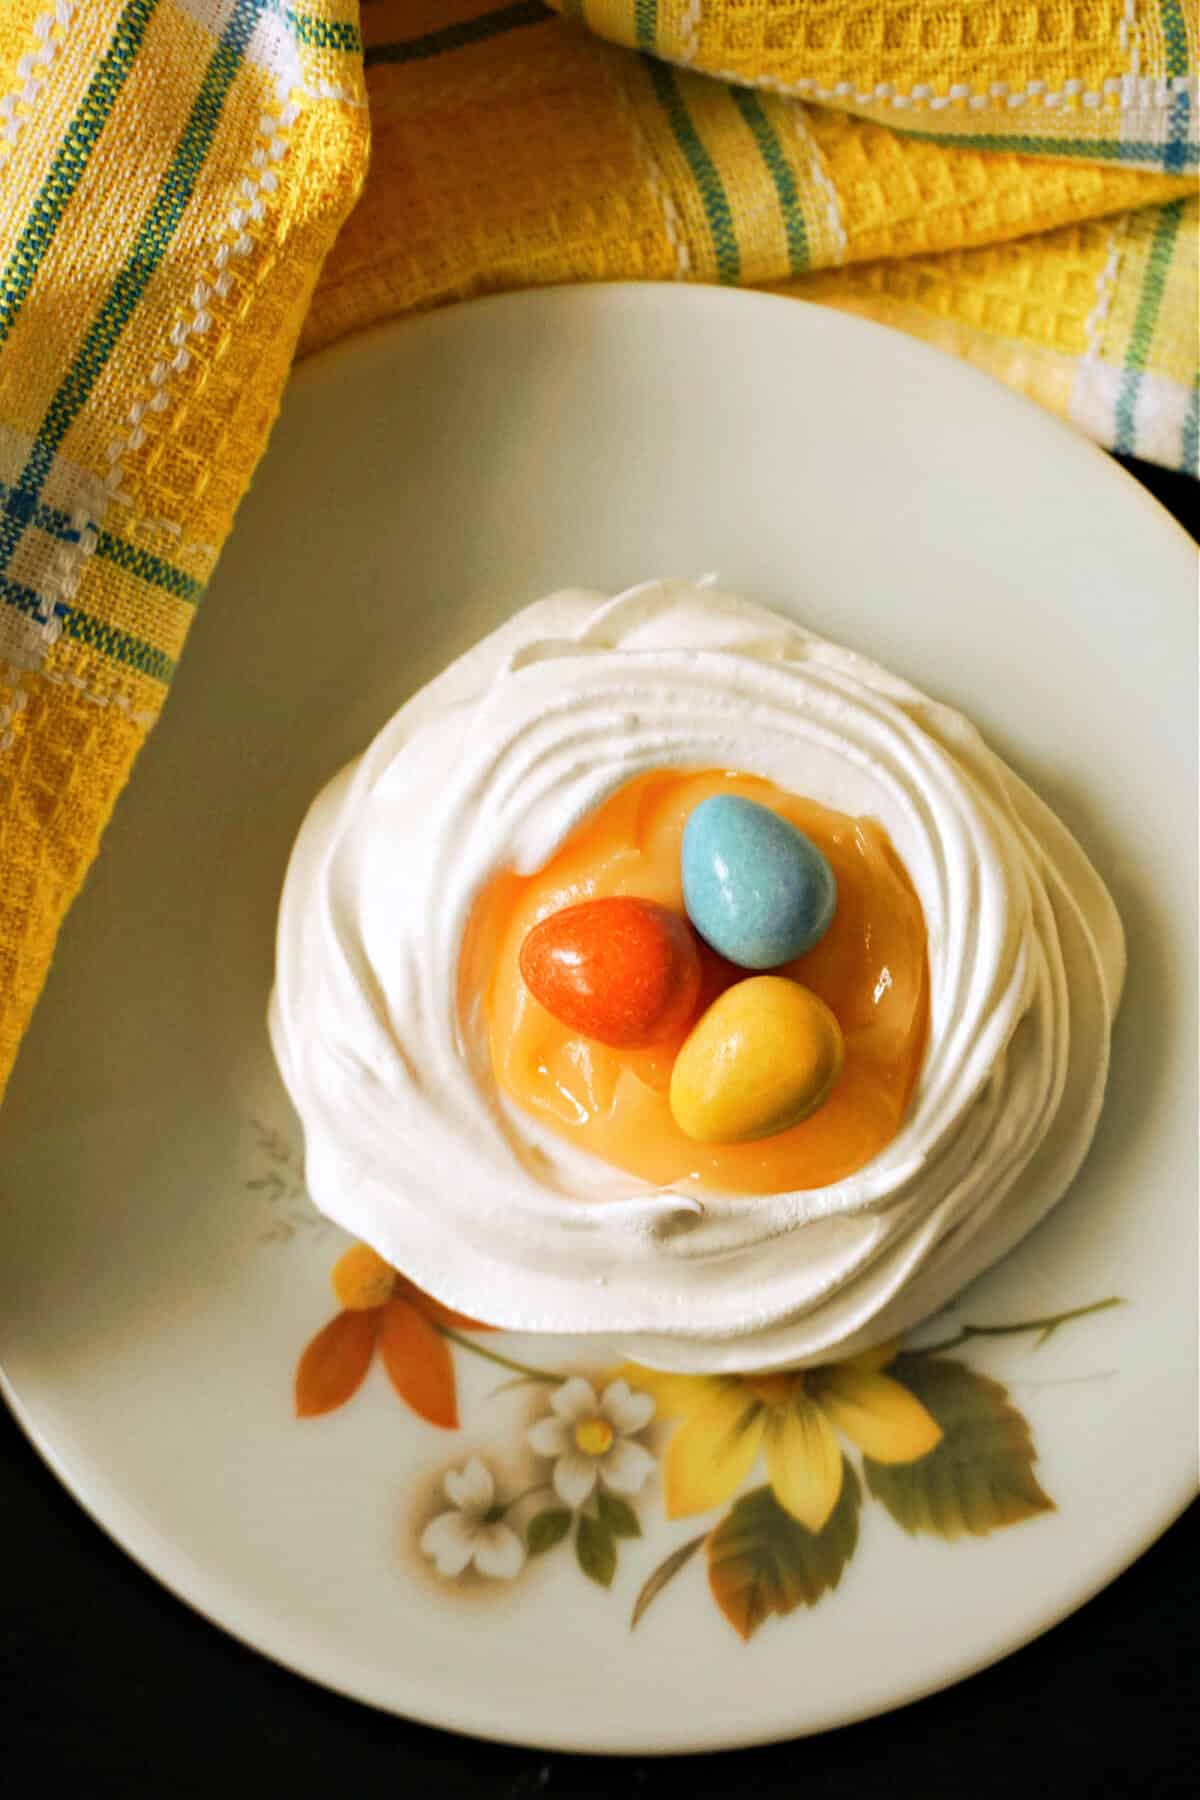 A meringue nest filled with lemon curd and topped with 3 chocolate eggs.